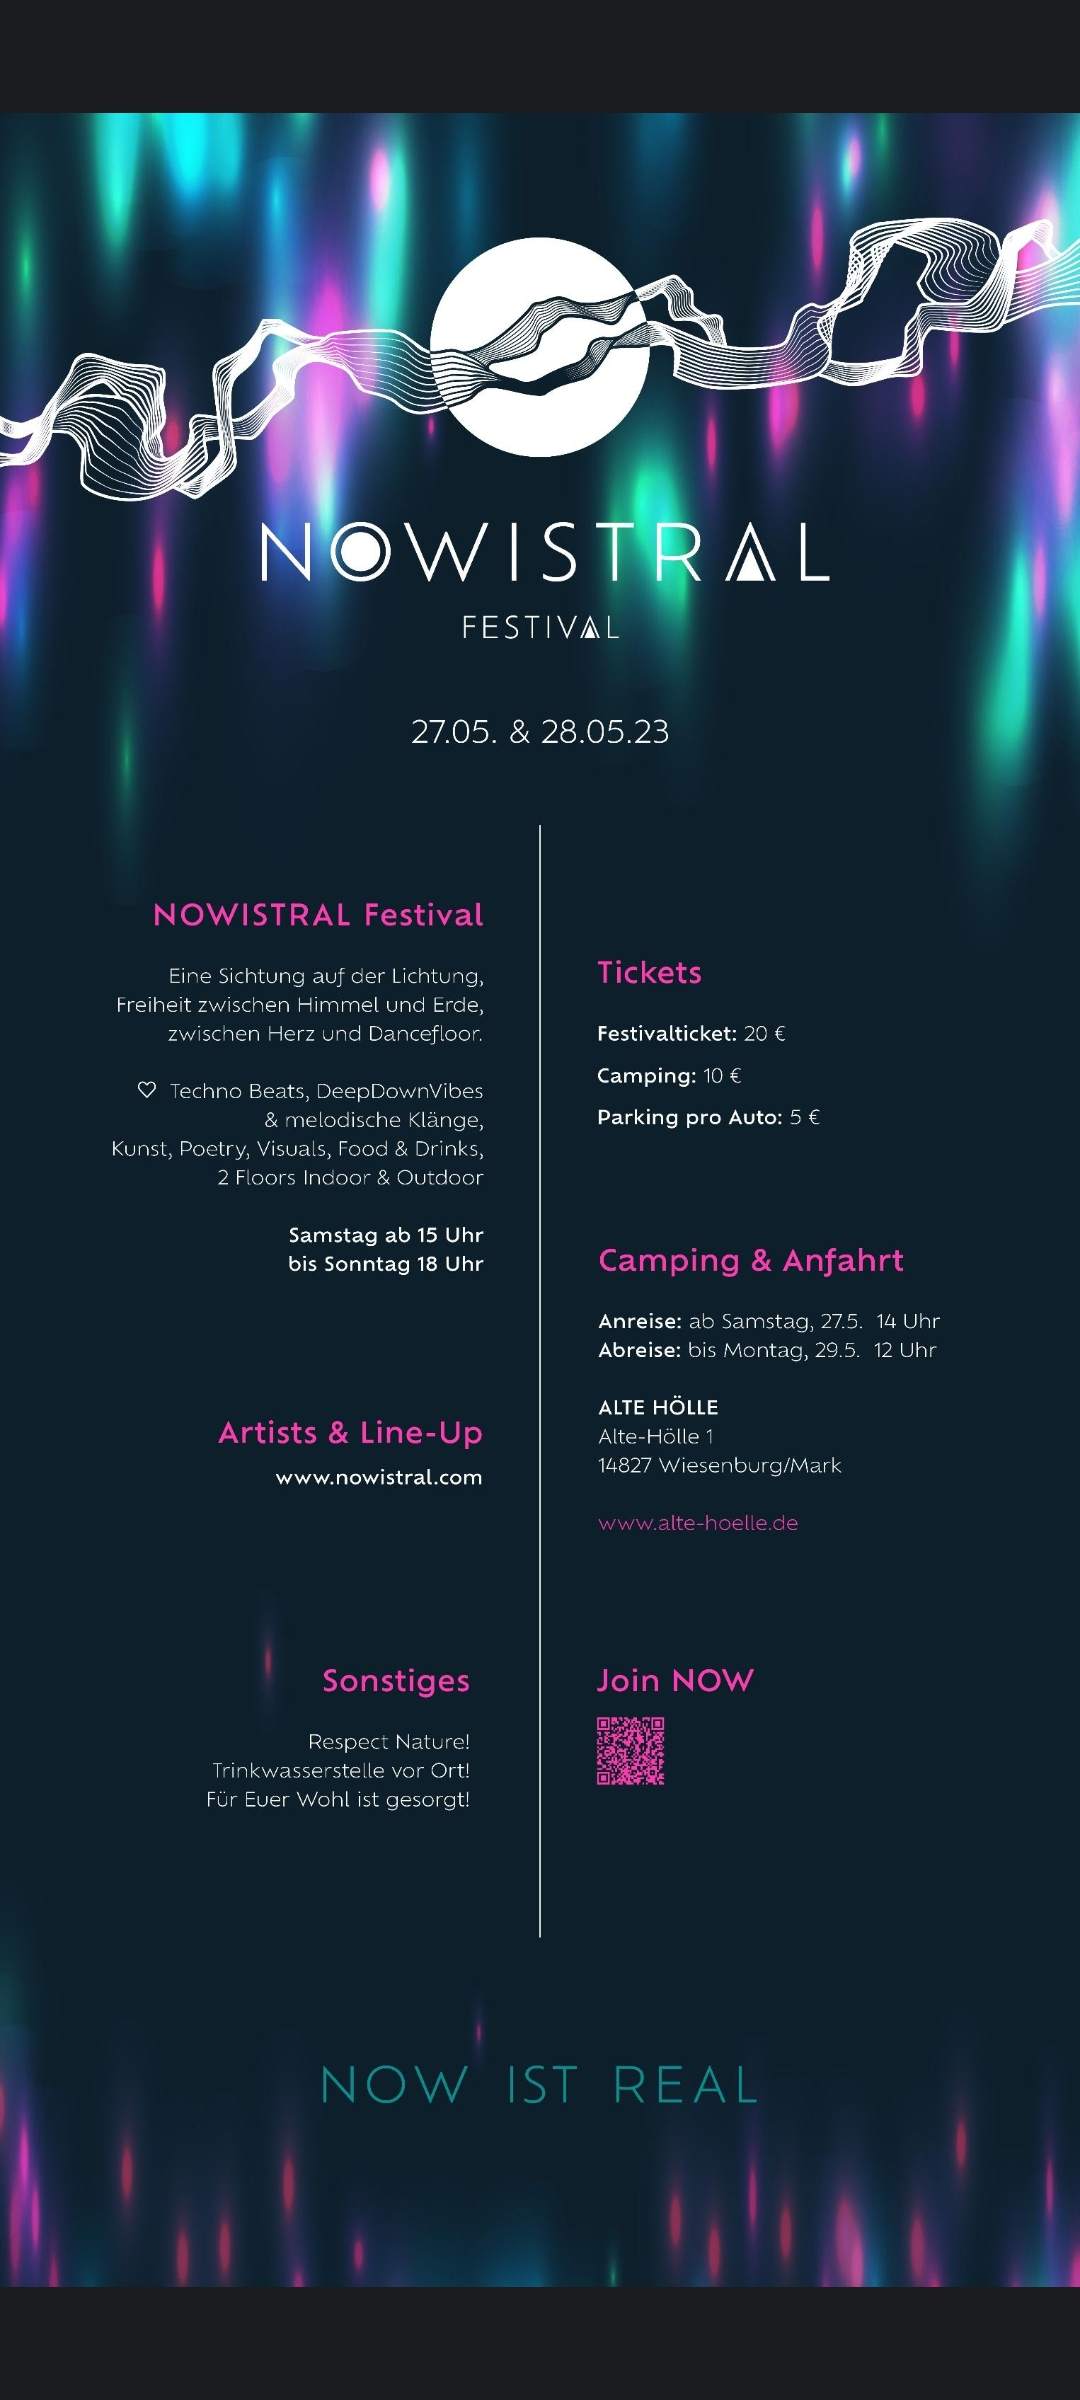 NOWISTRAL Festival - フライヤー表